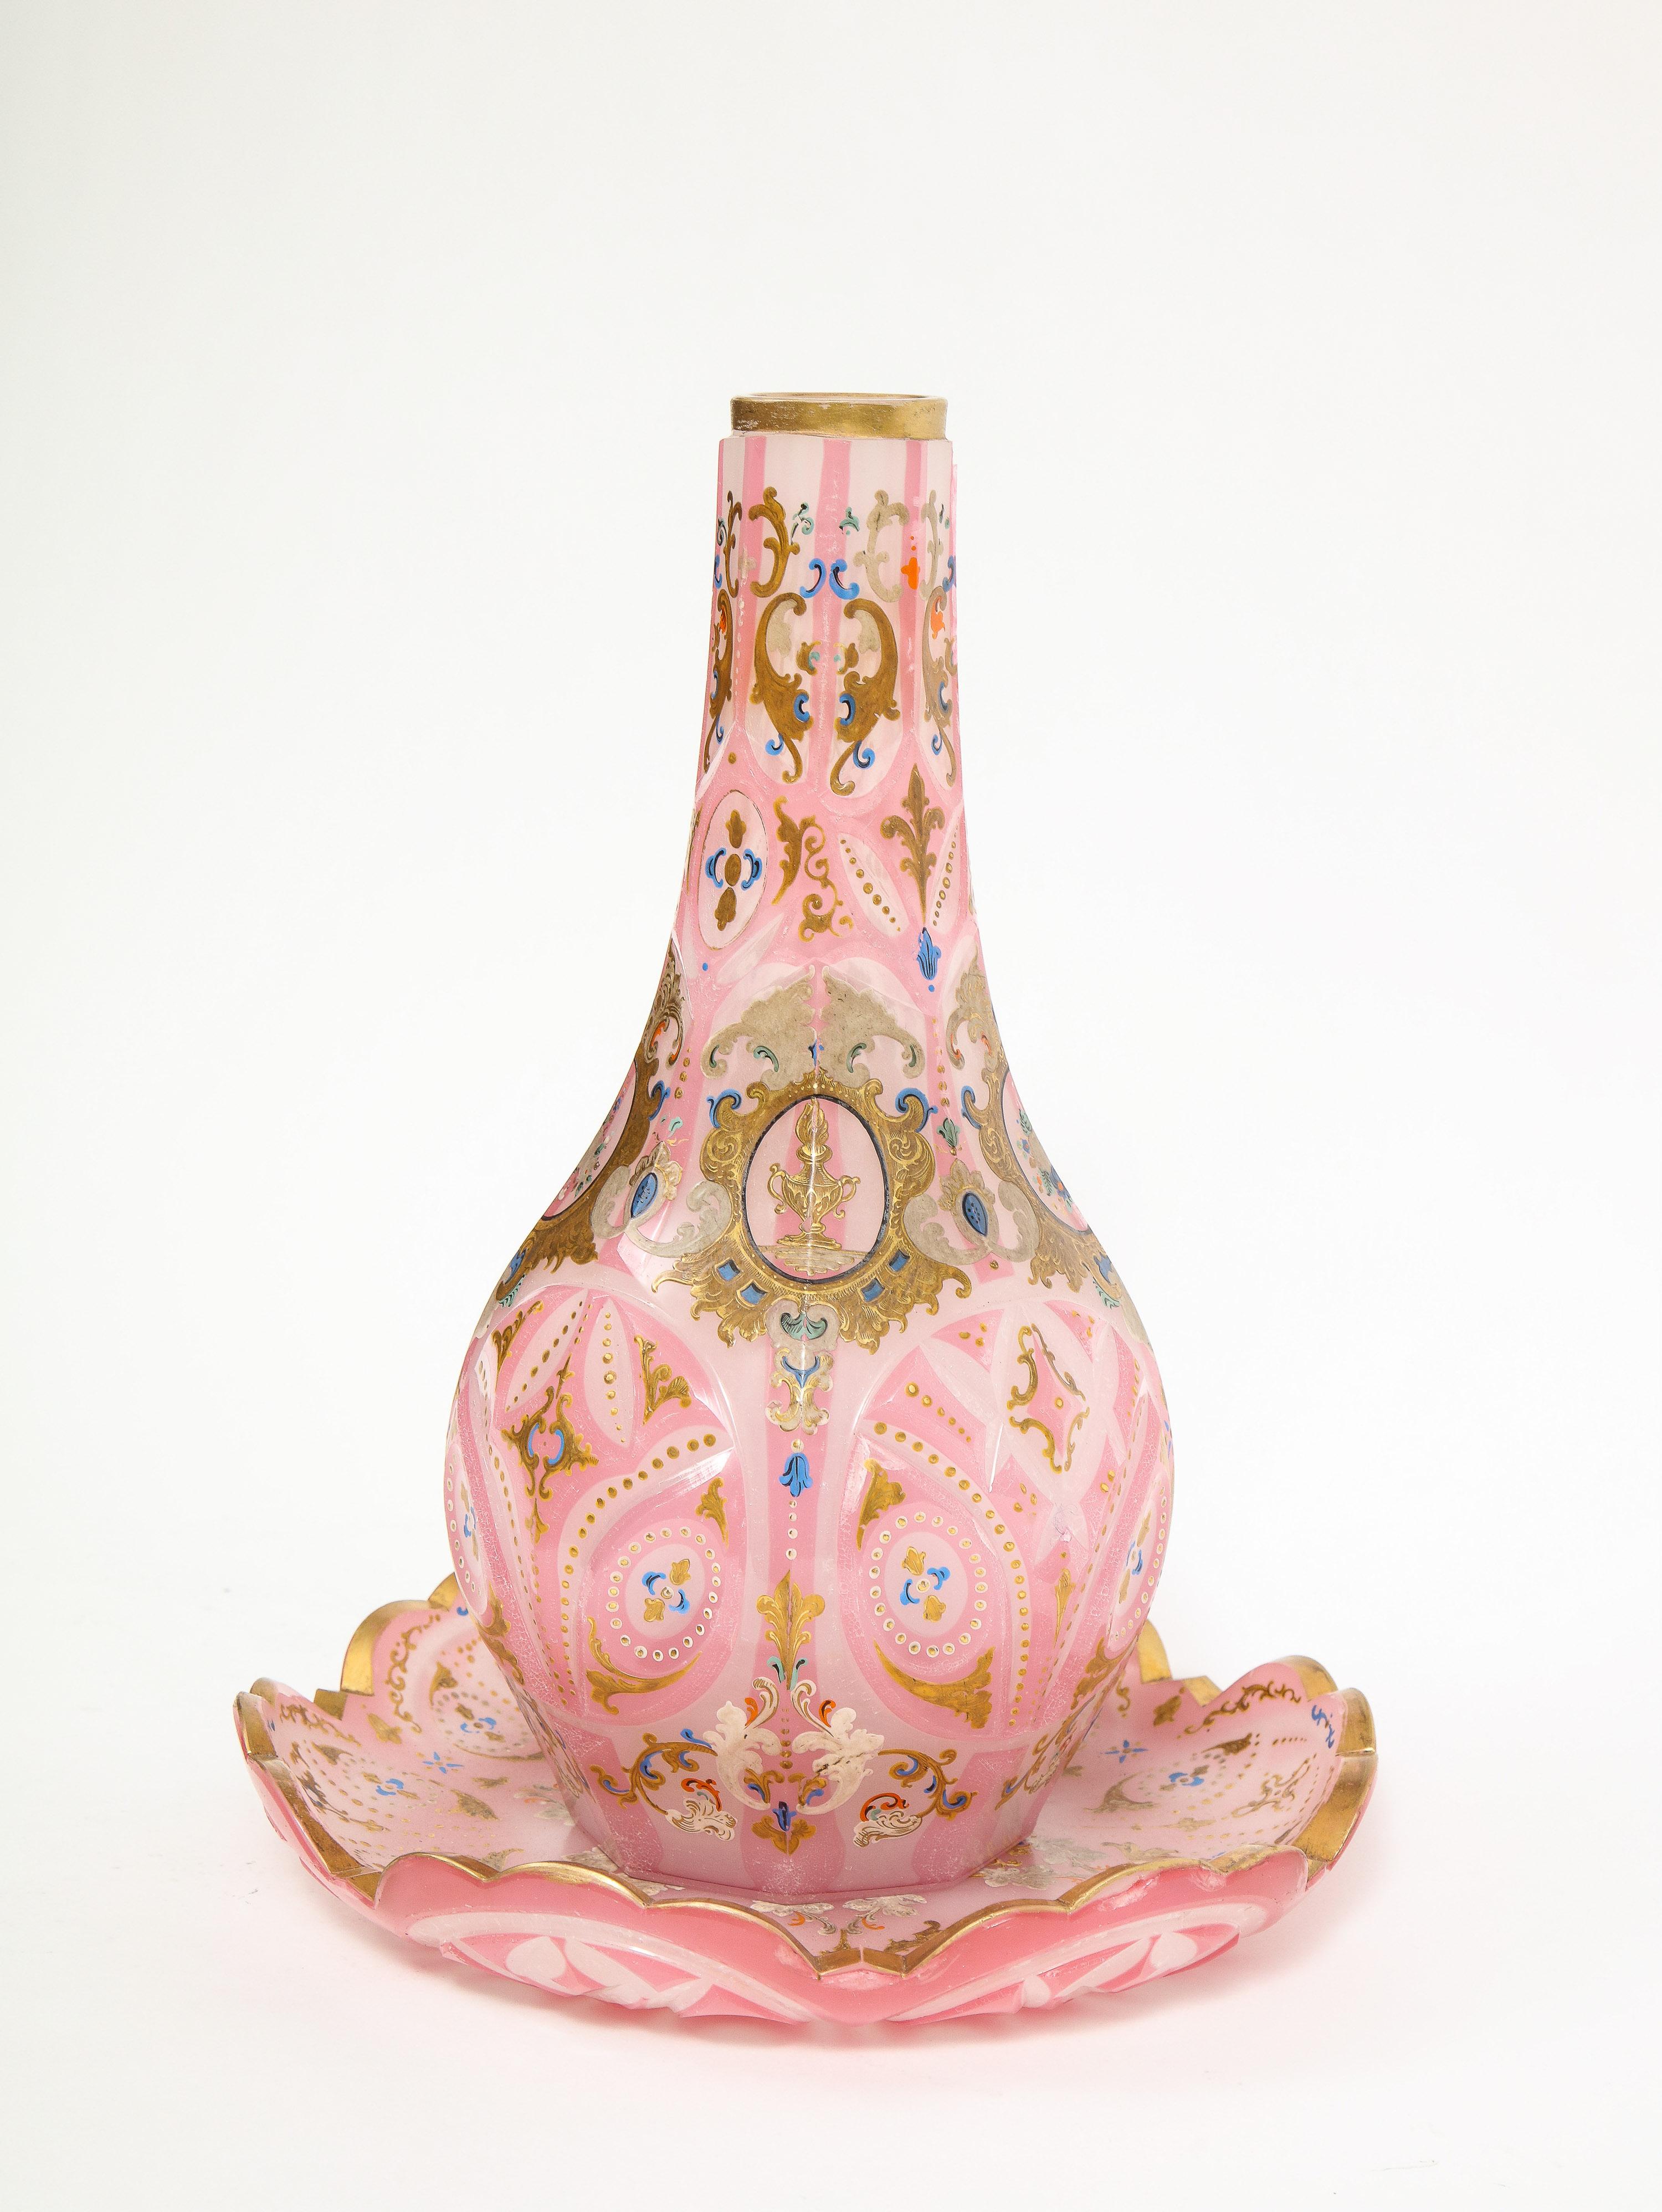 Exceptional quality pink triple overlay enameled Bohemian glass Hookah Nargile base with original plate, 19th century.

Made for the Ottoman Islamic market. 

Fantastic detailing throughout, enameled with flowers sand trophy medallions.